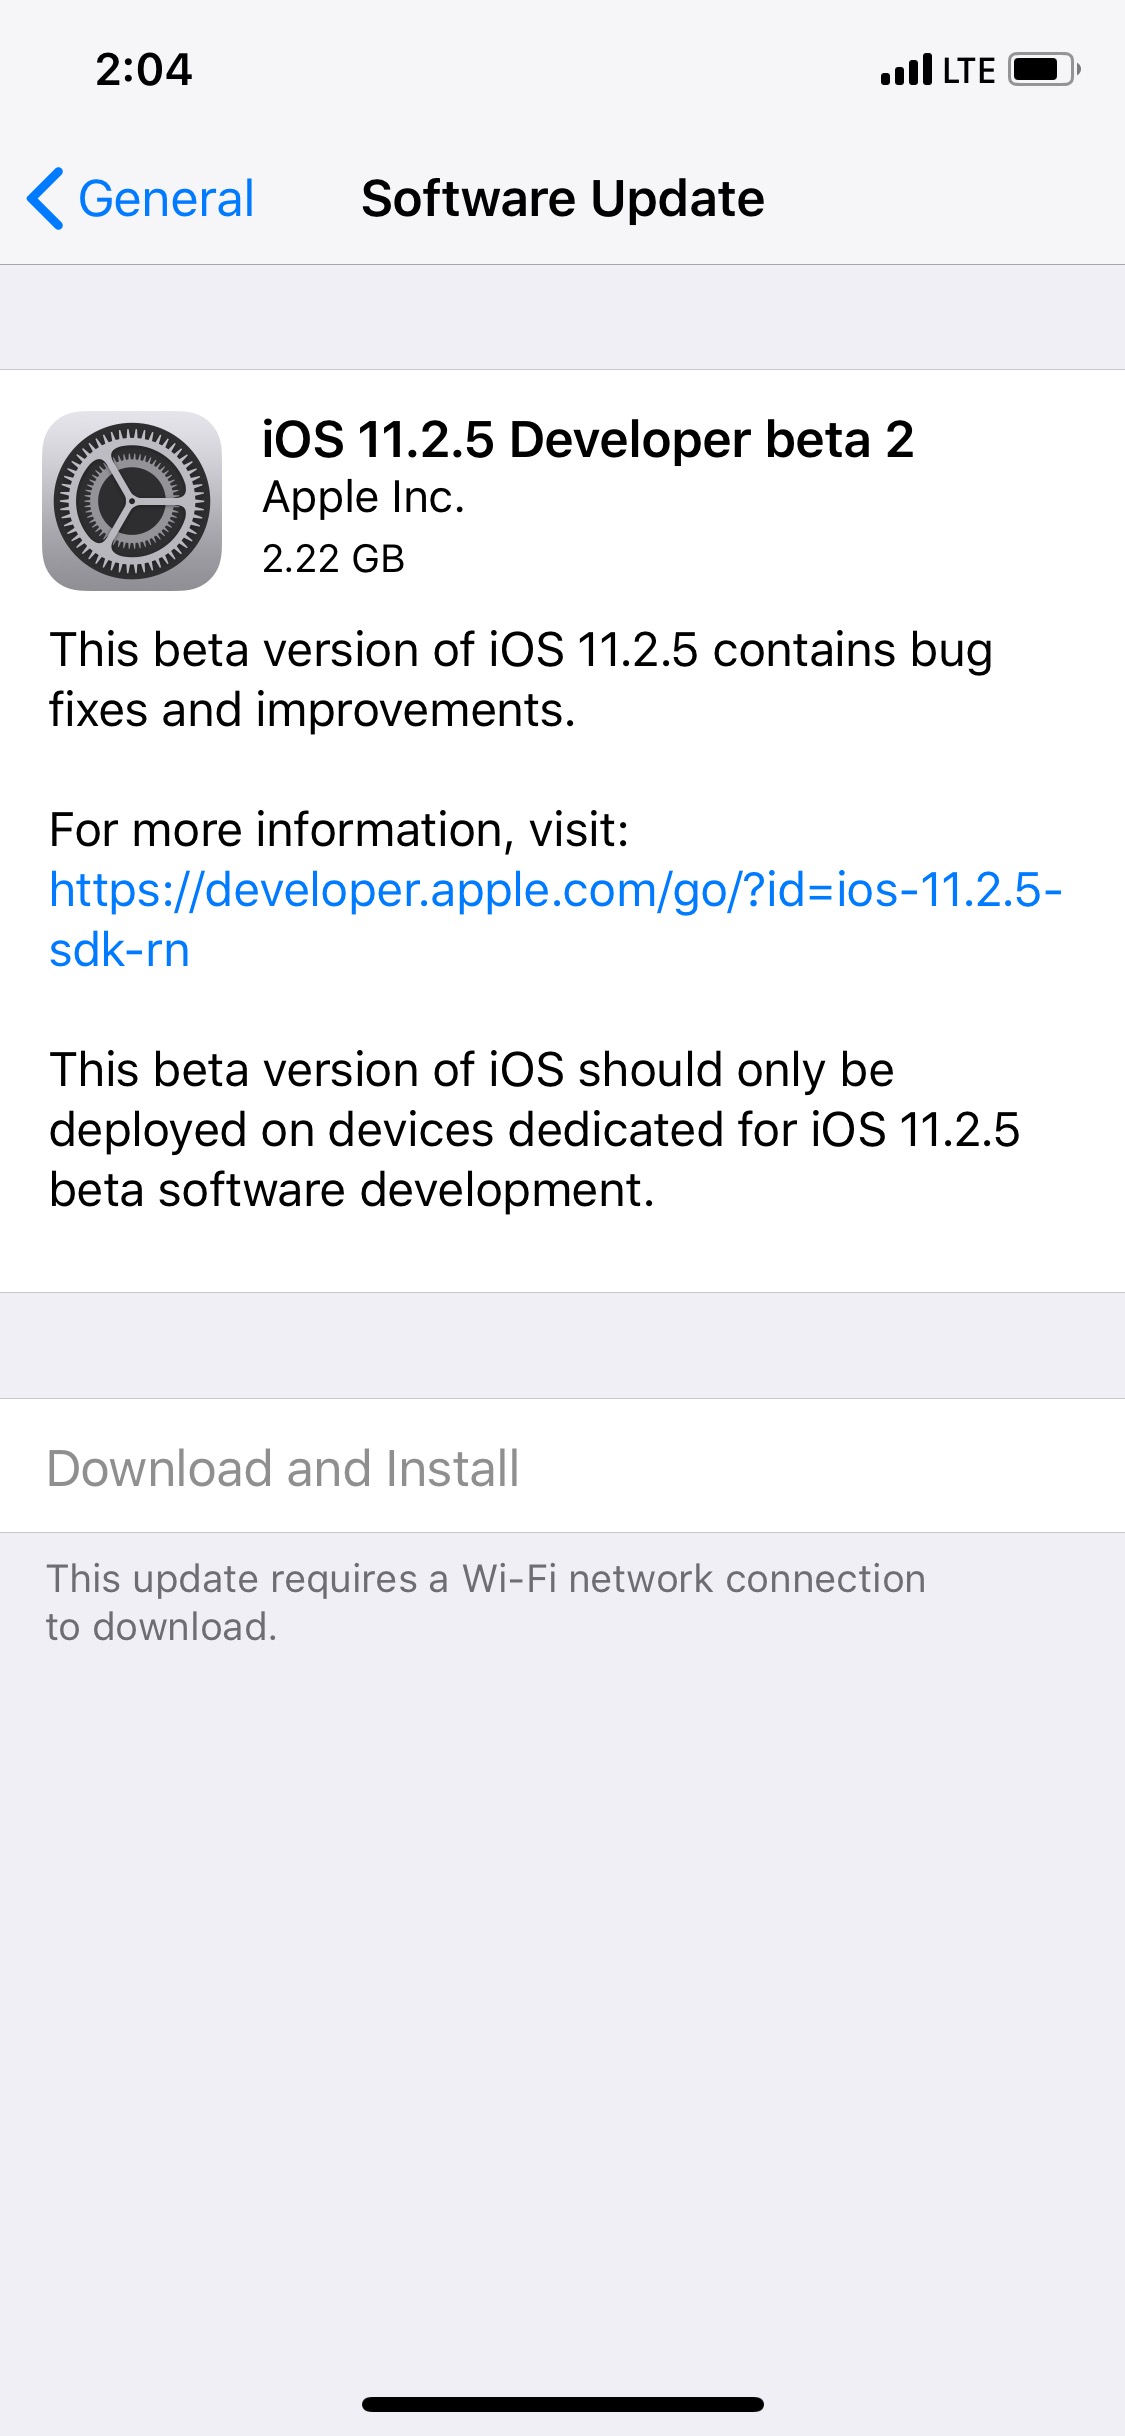 Apple Releases iOS 11.2.5 Beta 2 to Developers [Download]